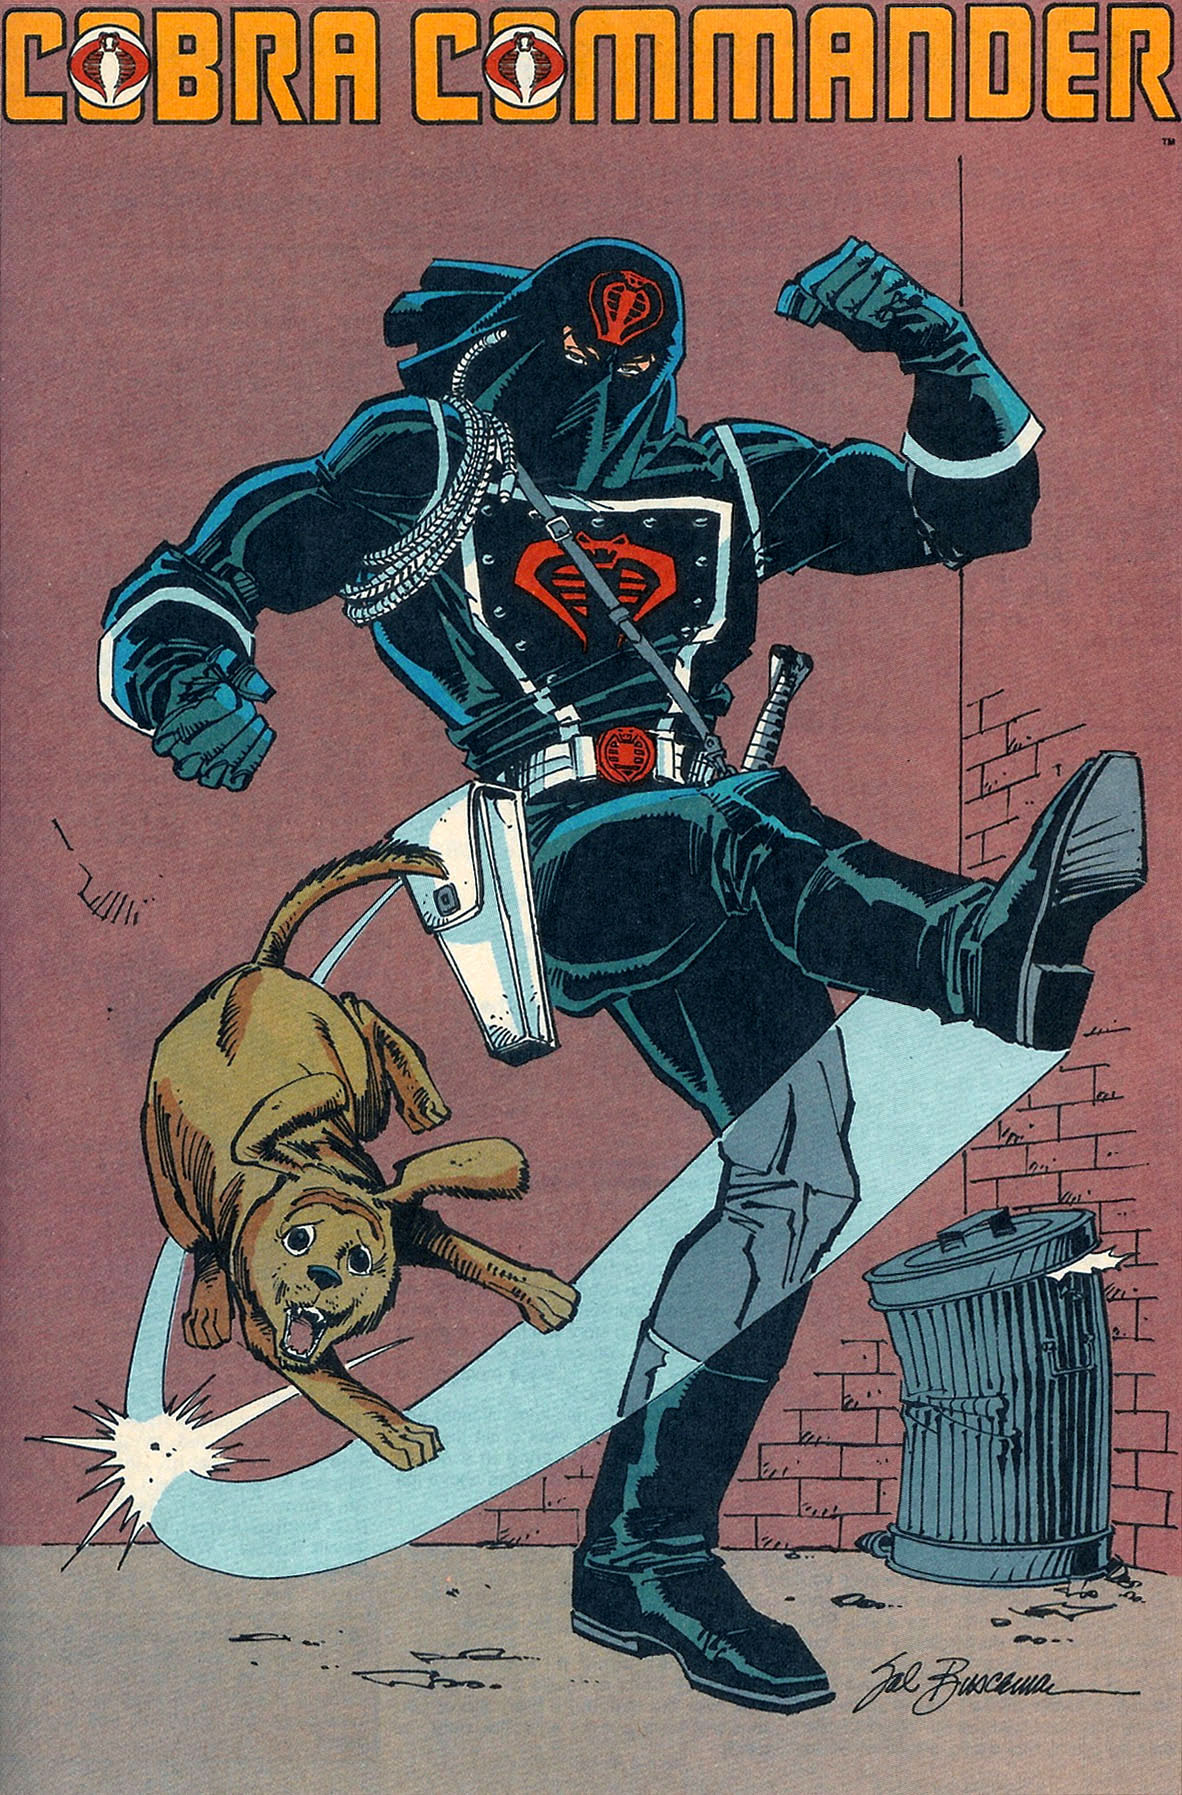 The City of Monzville, Cobra Commander is by far my favorite character...